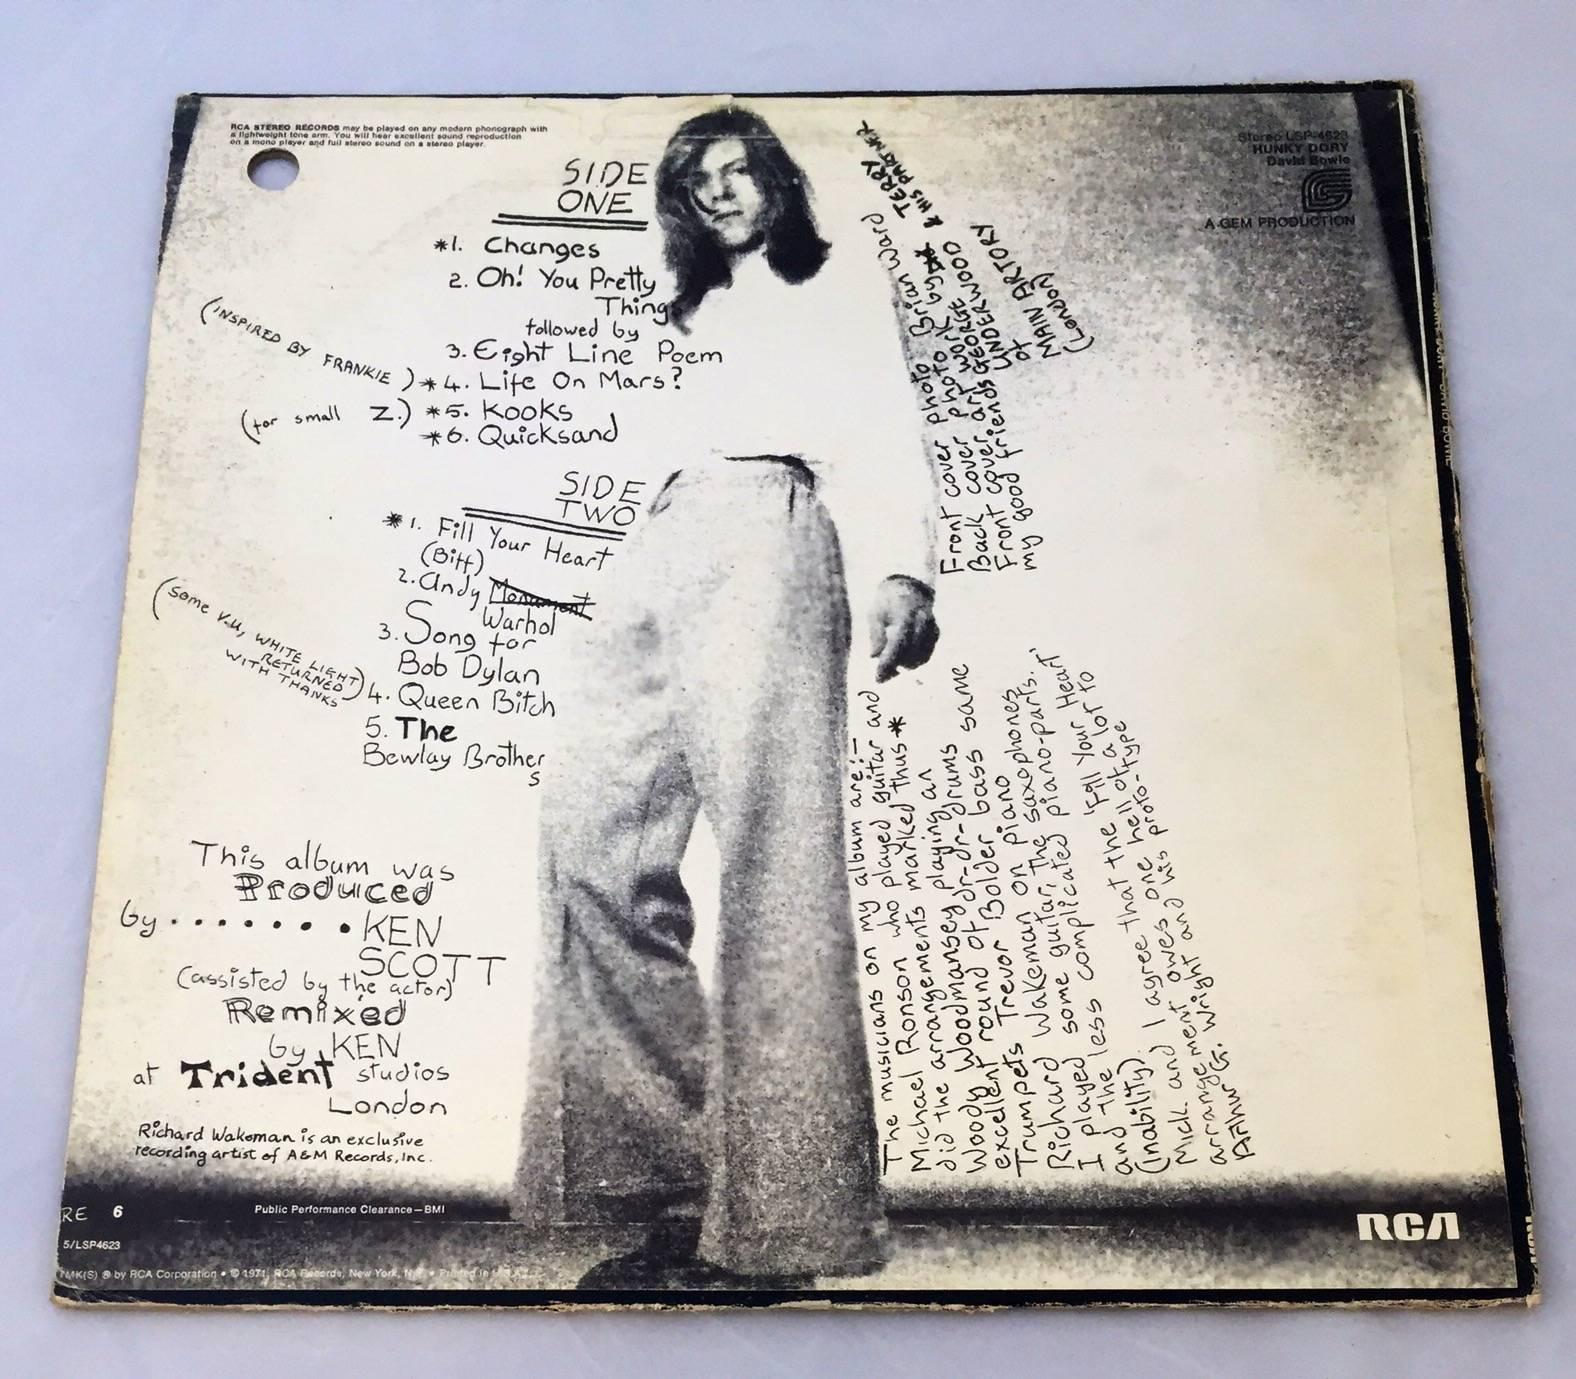 Original David Bowie hunky dory vinyl first pressing

RCA Records, 1971

Minor wear to cover; otherwise good to very good vintage condition 

Record plays nicely and is in good to very good shape

Hunky Dory is the fourth studio album by the